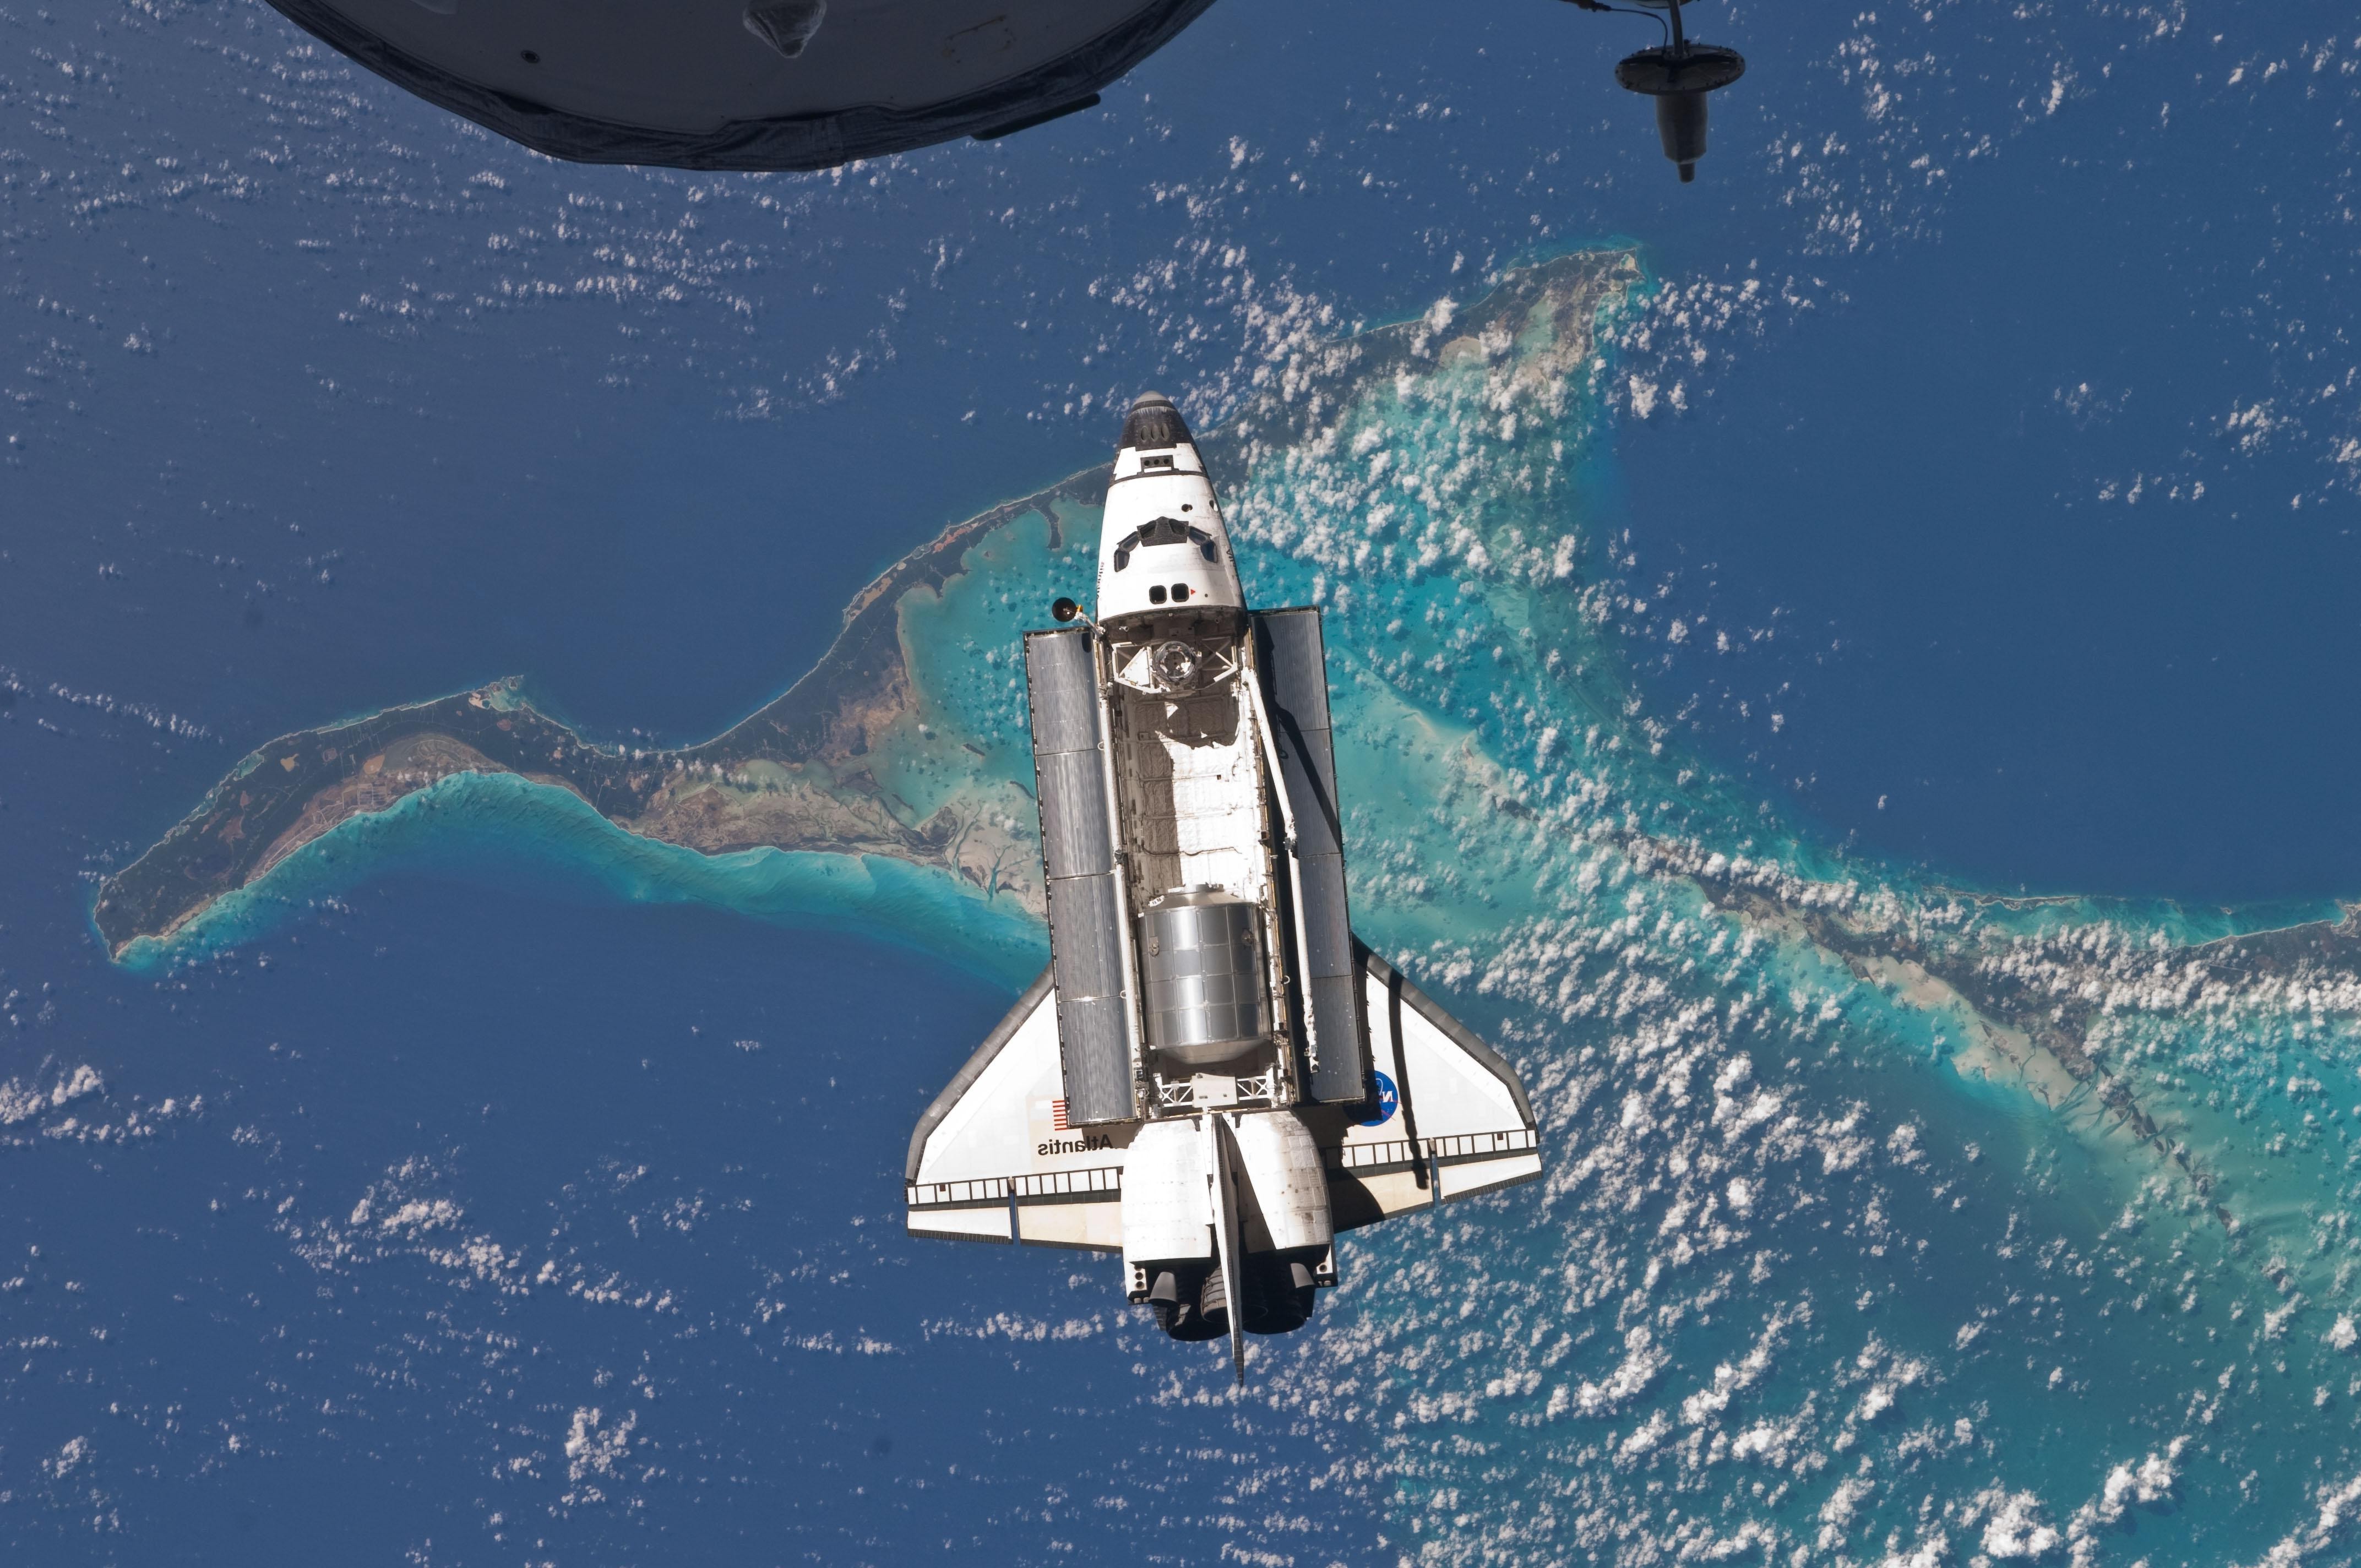 Space Shuttle atlantis Wallpapers and Background Images - stmed.net